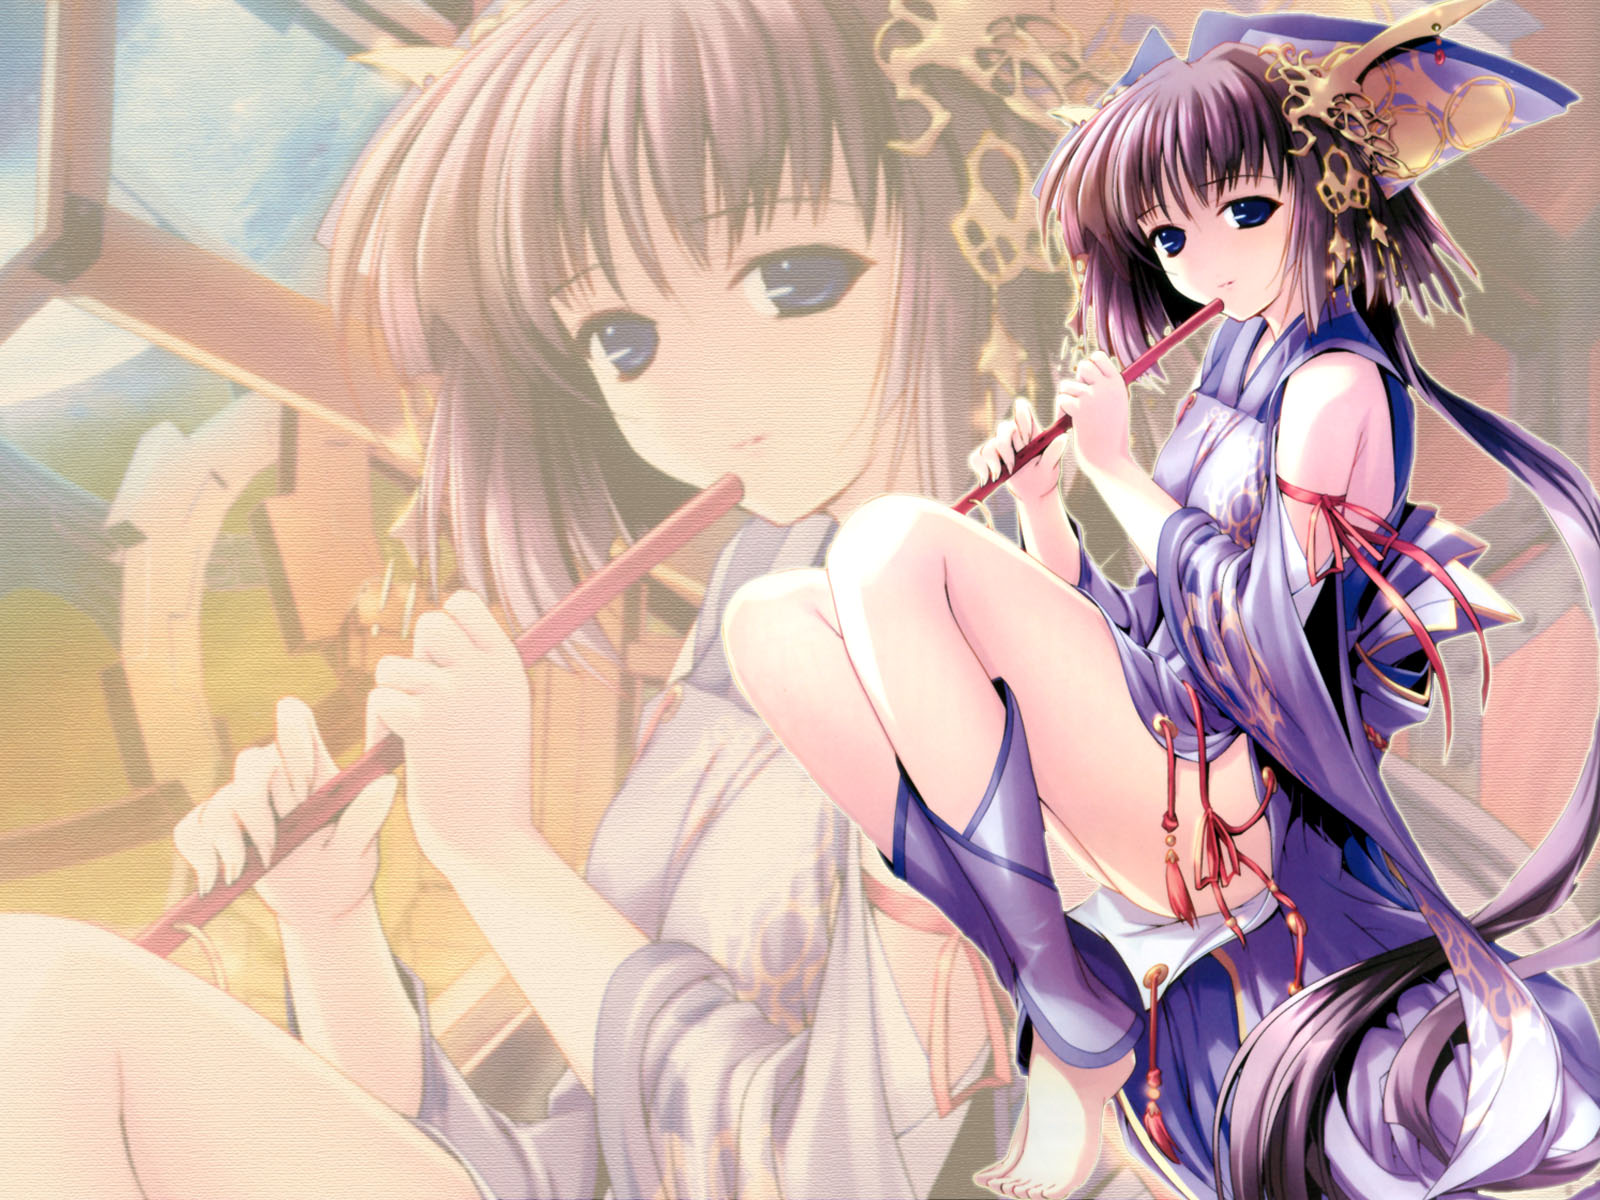 Image Gallary 1: Beautiful Free Anime Wallpapers for Desktop